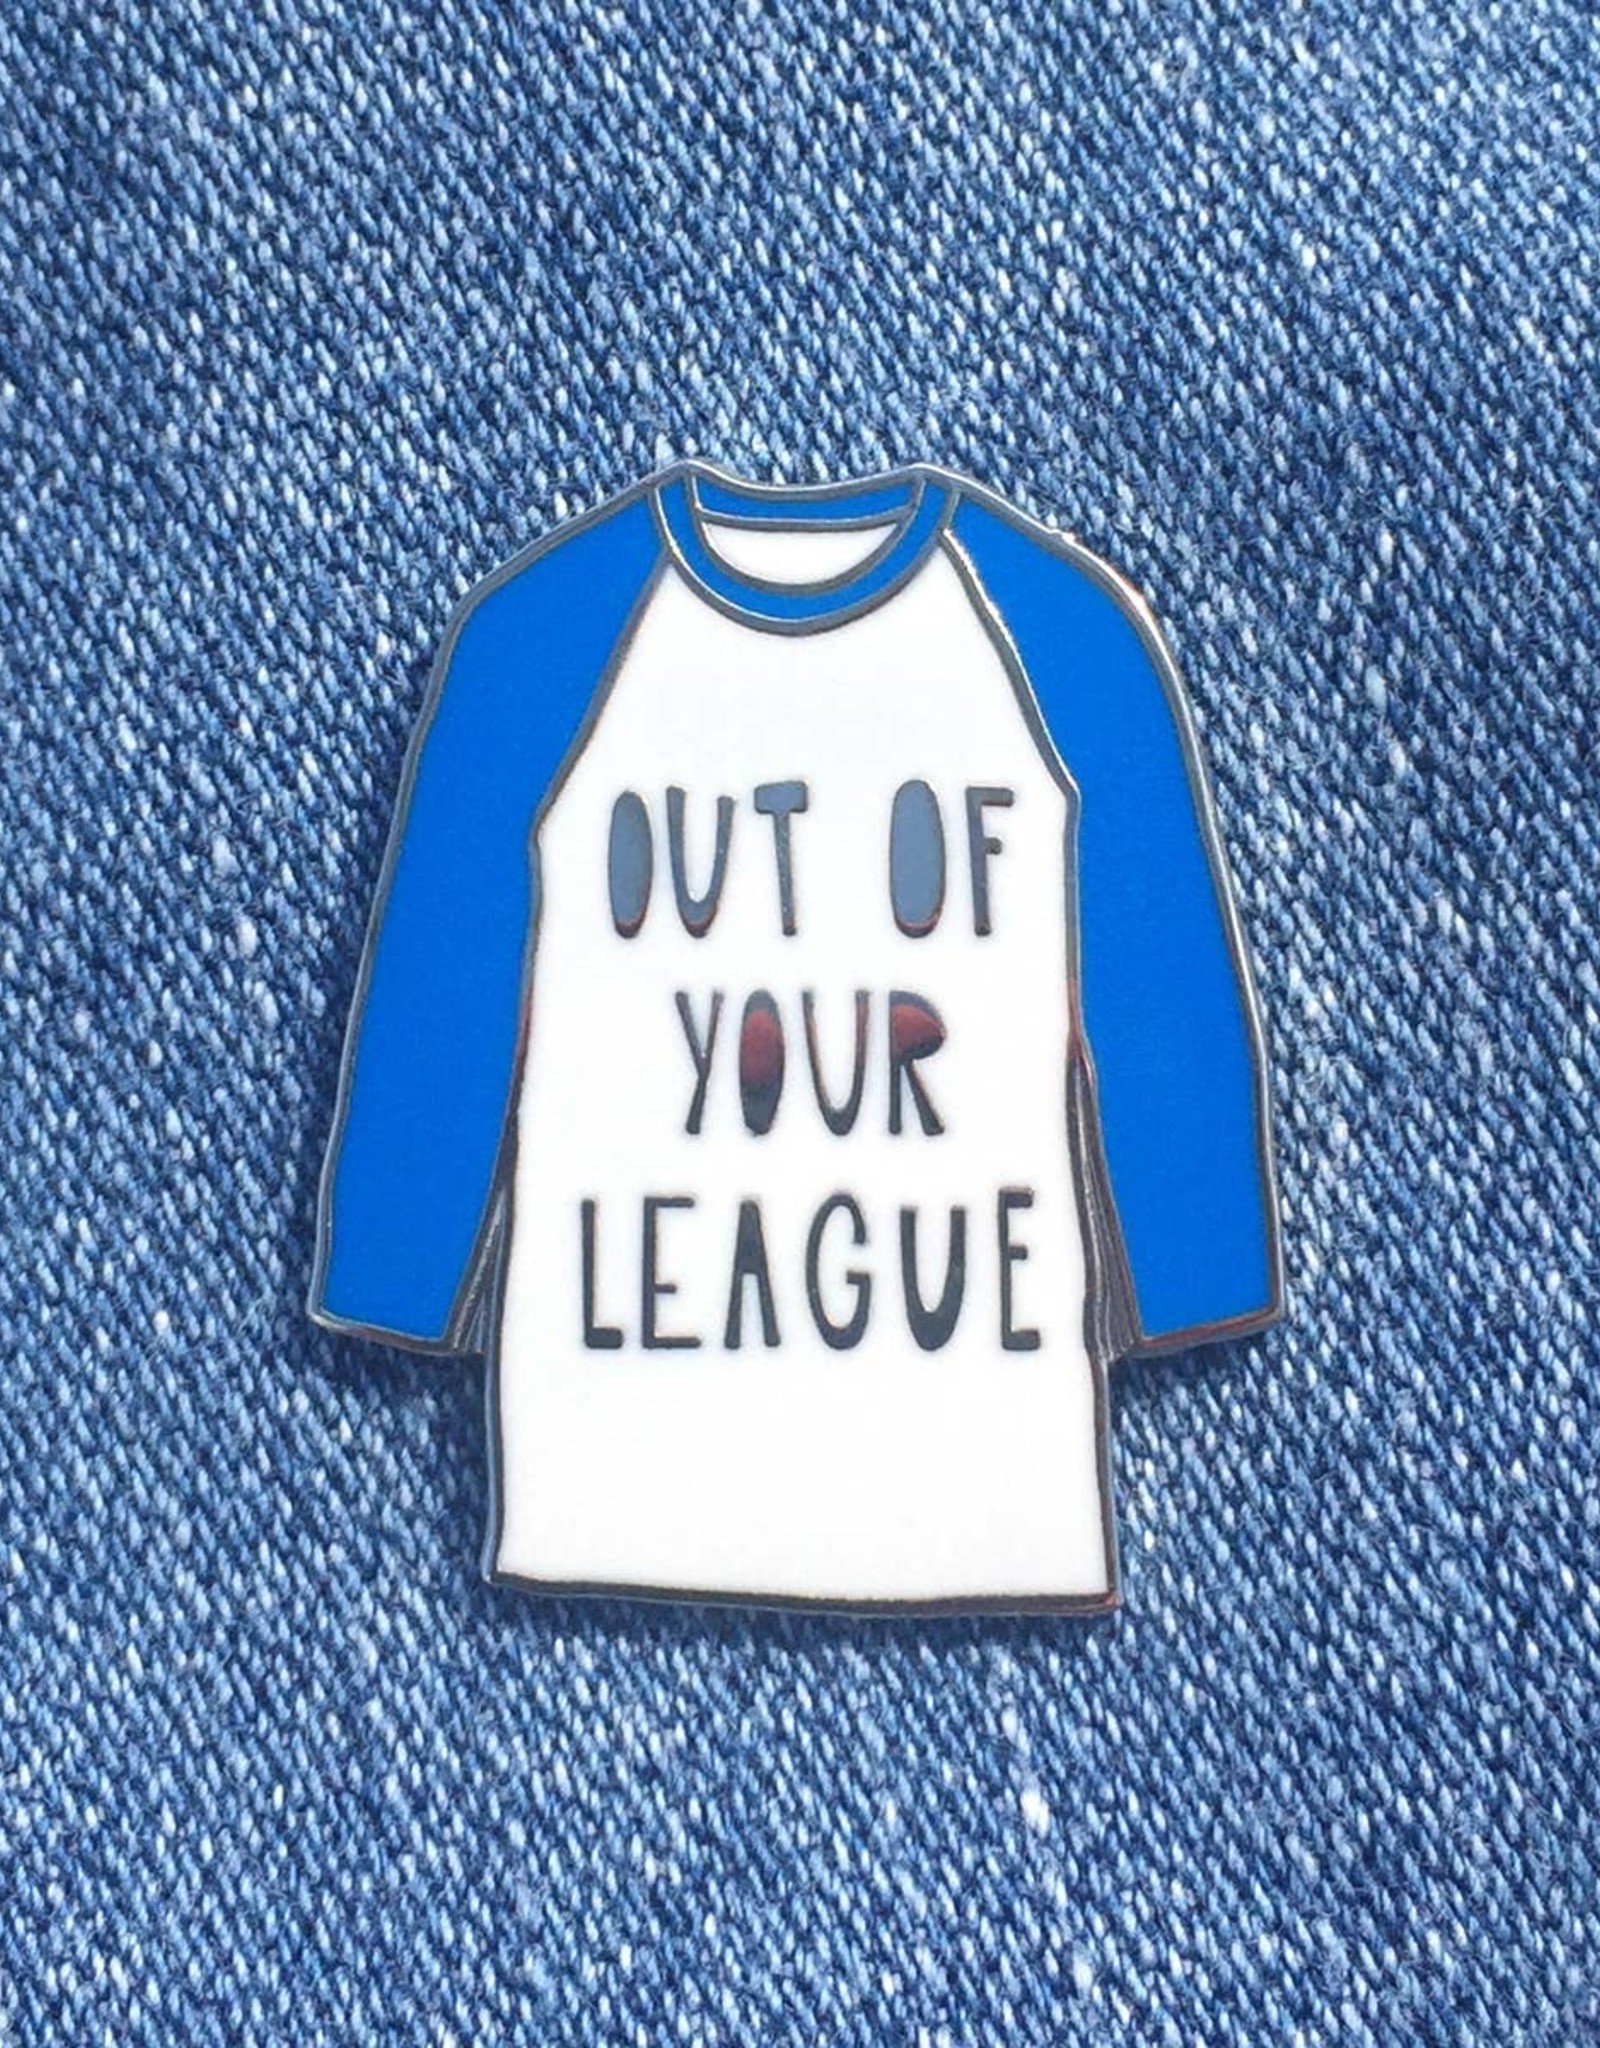 Near Modern Disaster Enamel Pin - Out of Your League